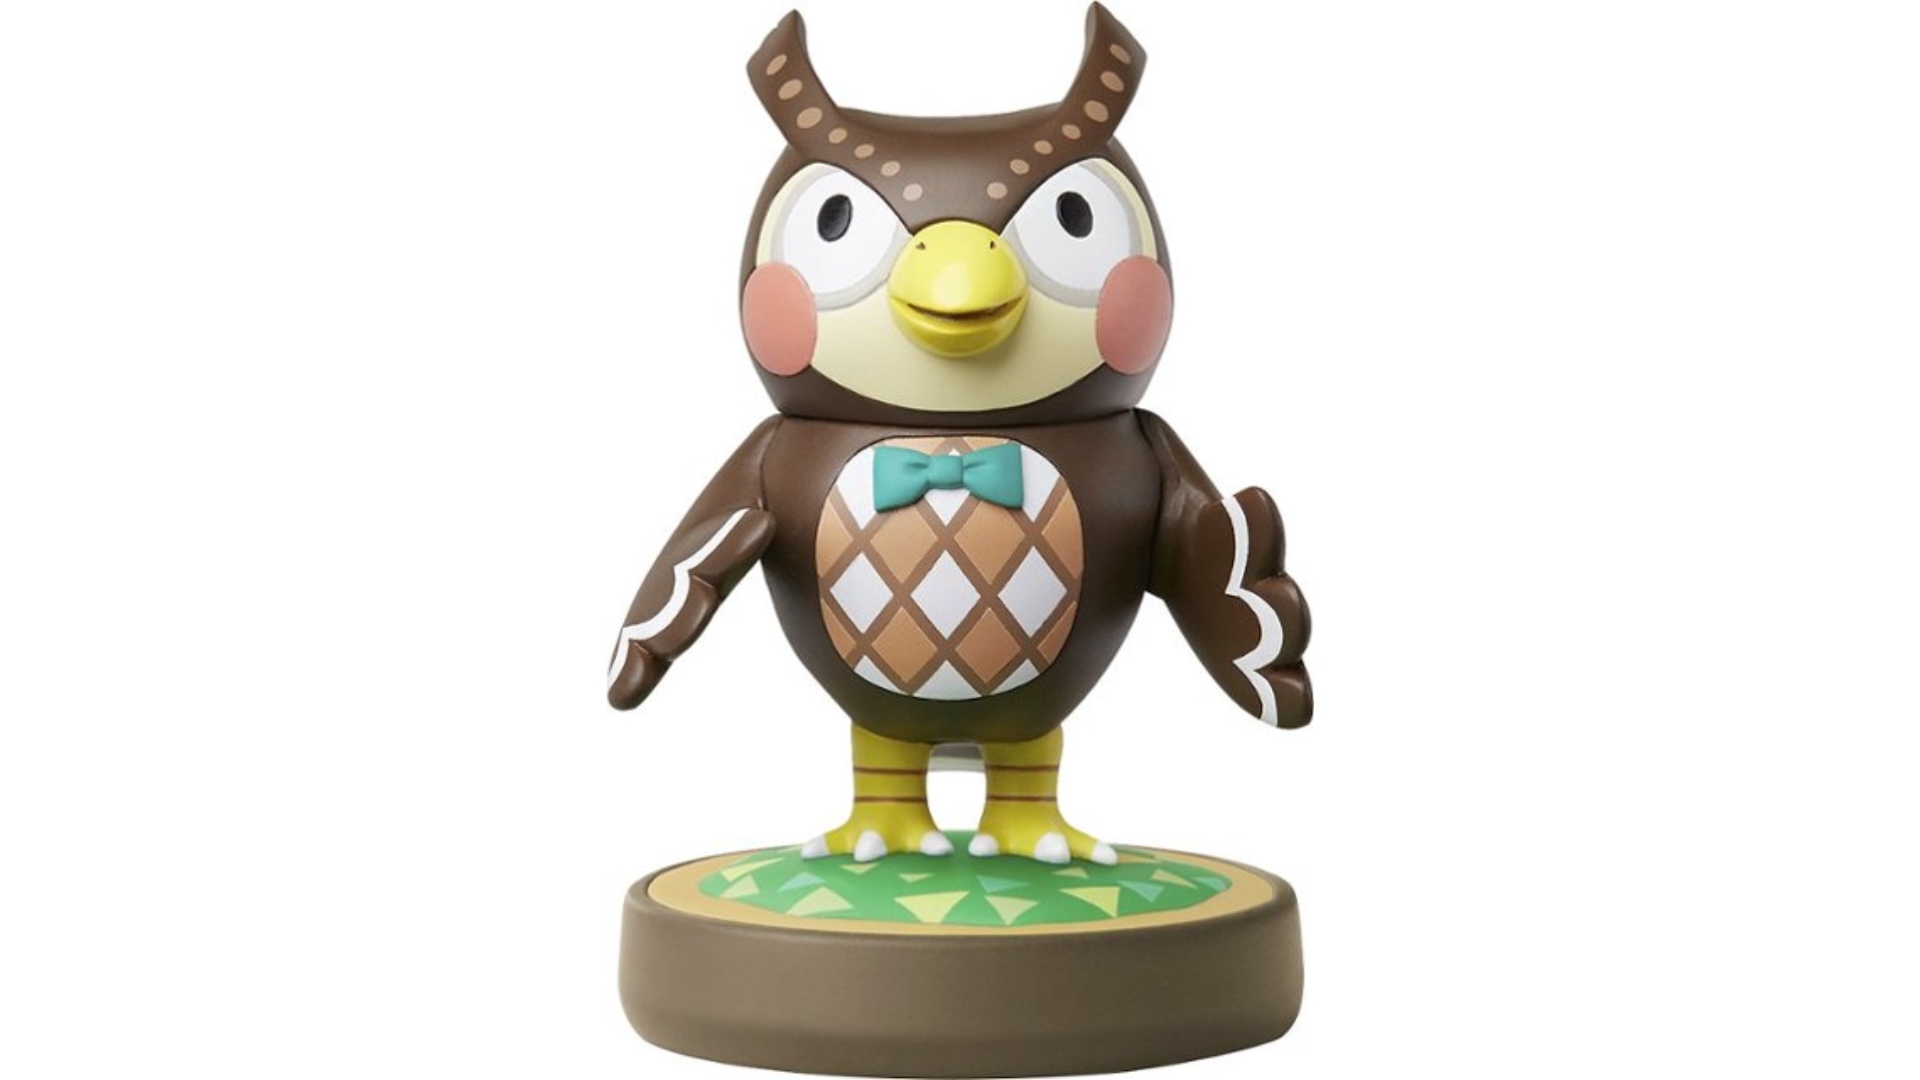 A Blathers Amiibo on a white background.